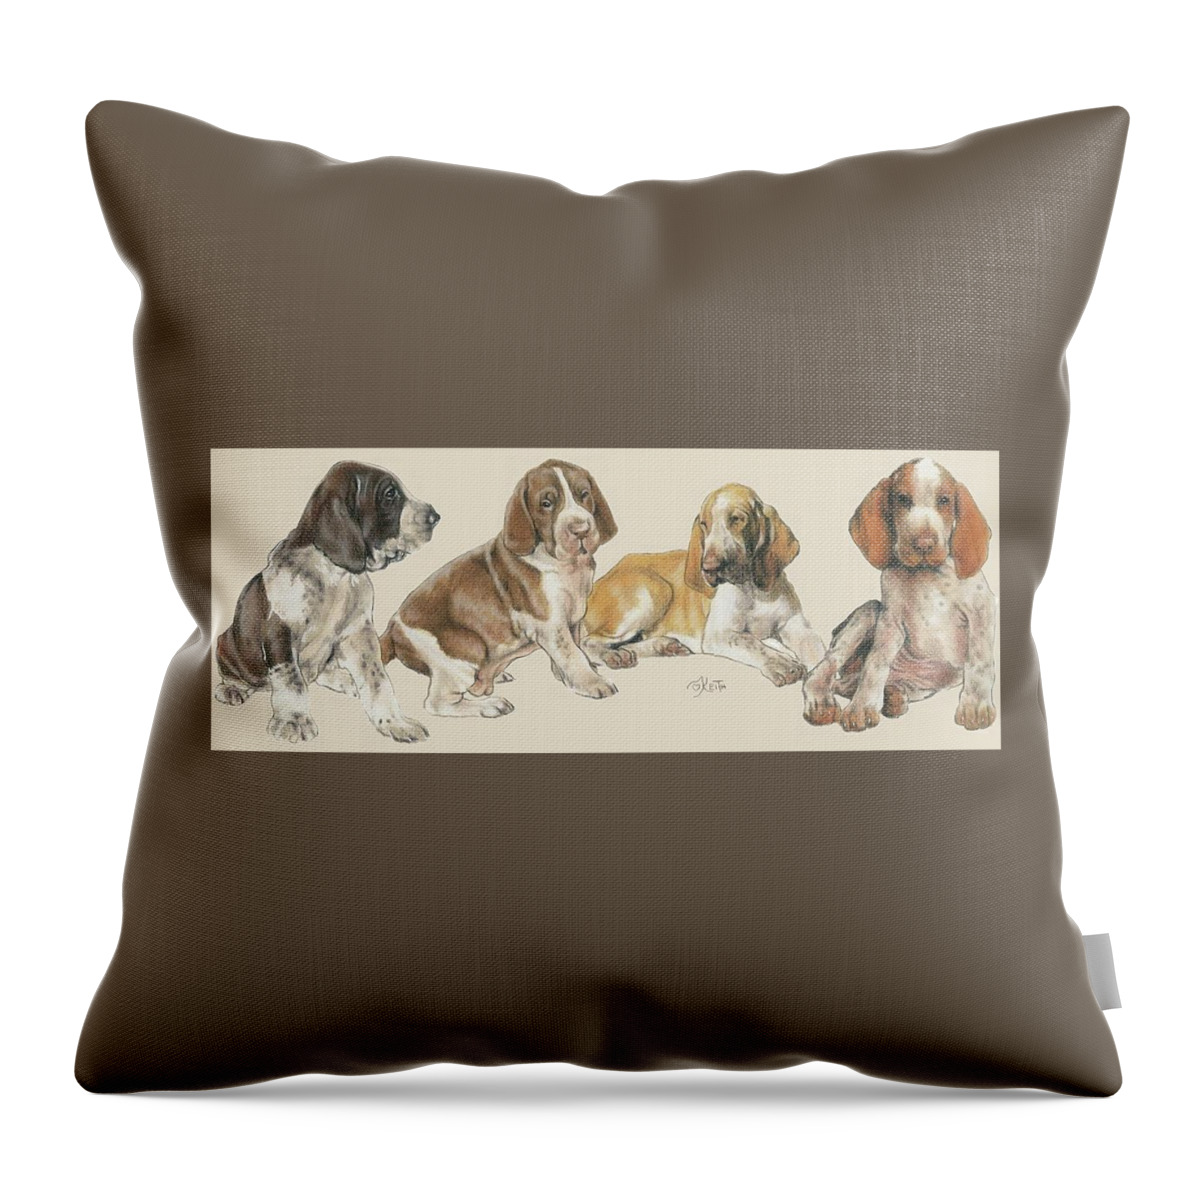 Sporting Class Throw Pillow featuring the mixed media Bracco Italiano Puppies by Barbara Keith